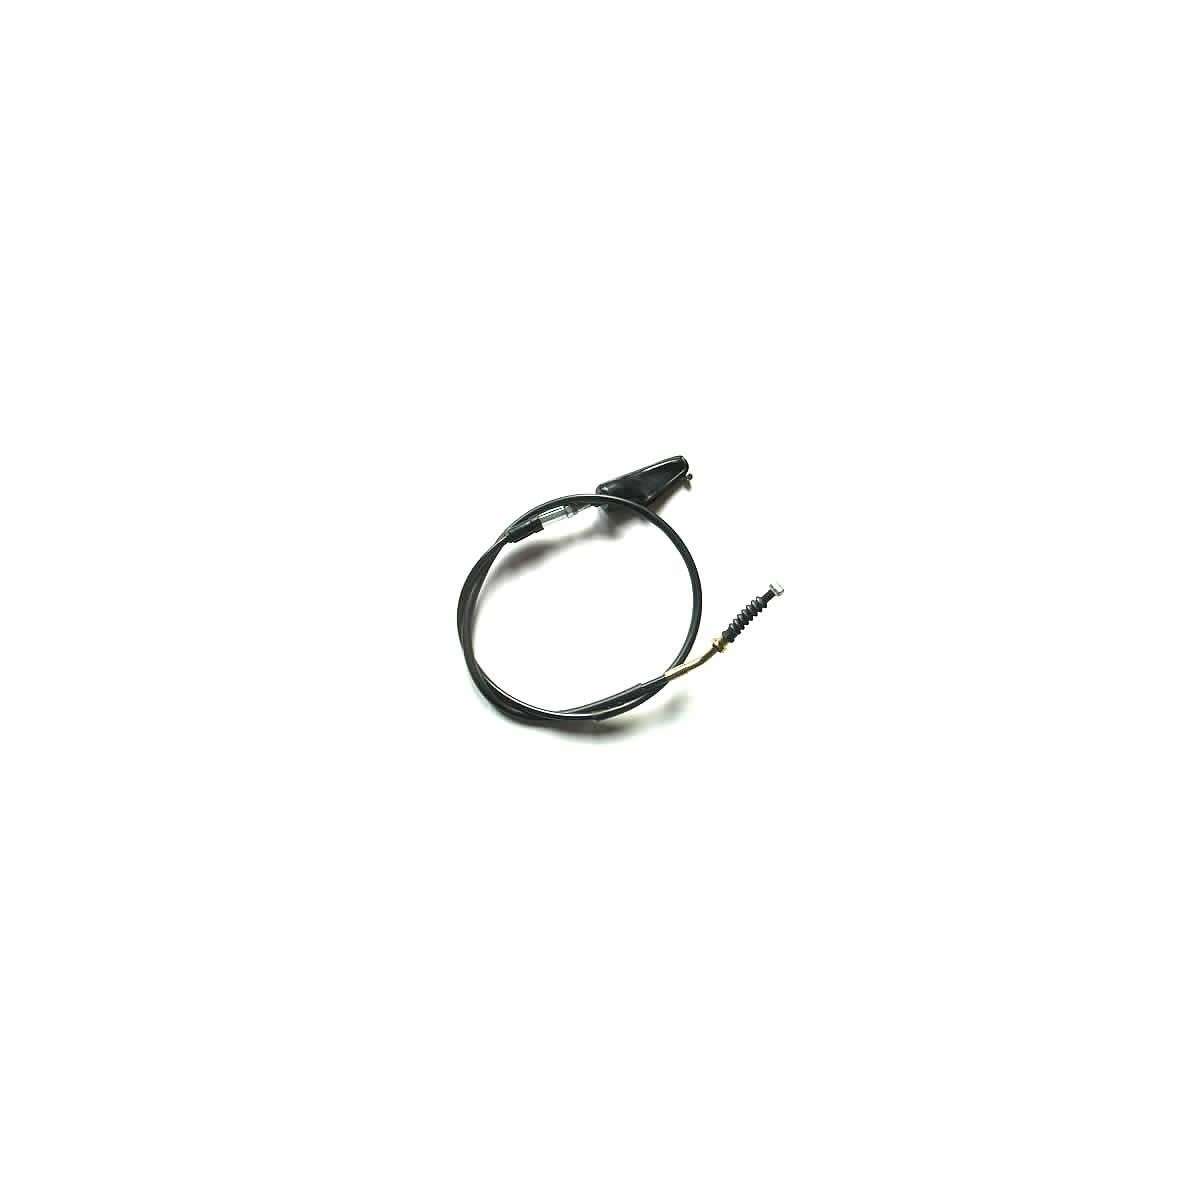 ZAP Clutch Cable  Yamaha YZF 250/450 14-17